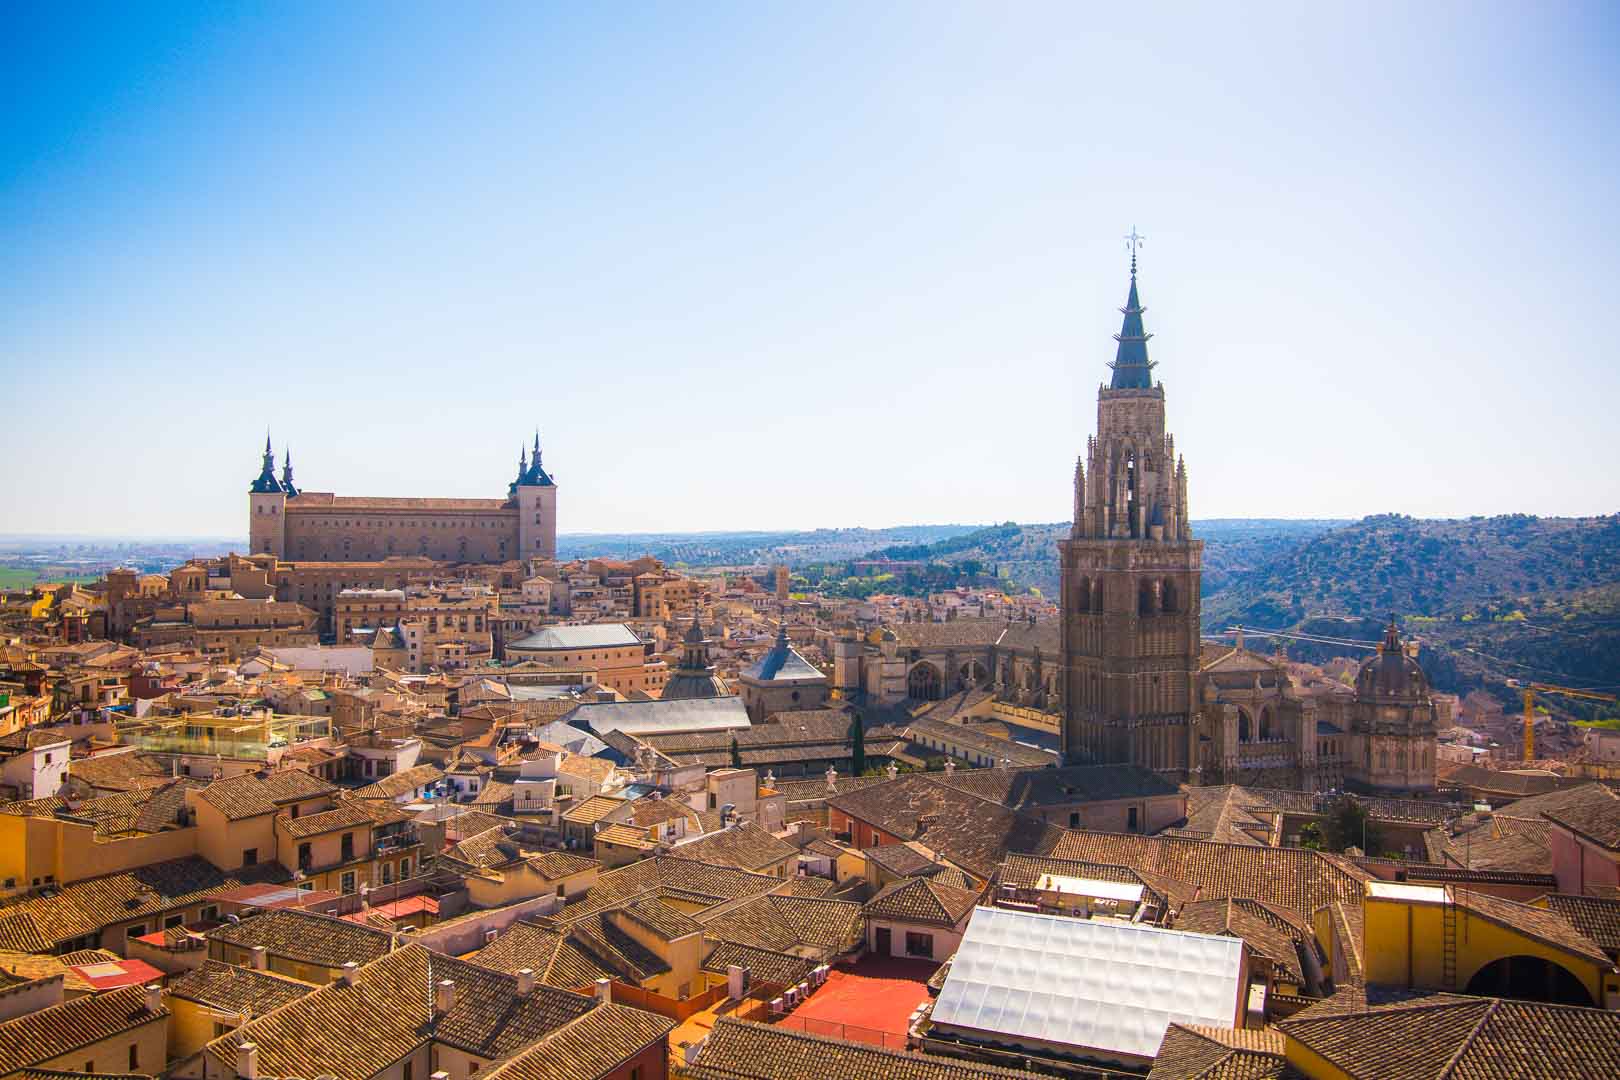 view over the catedral de toledo and the alcazar